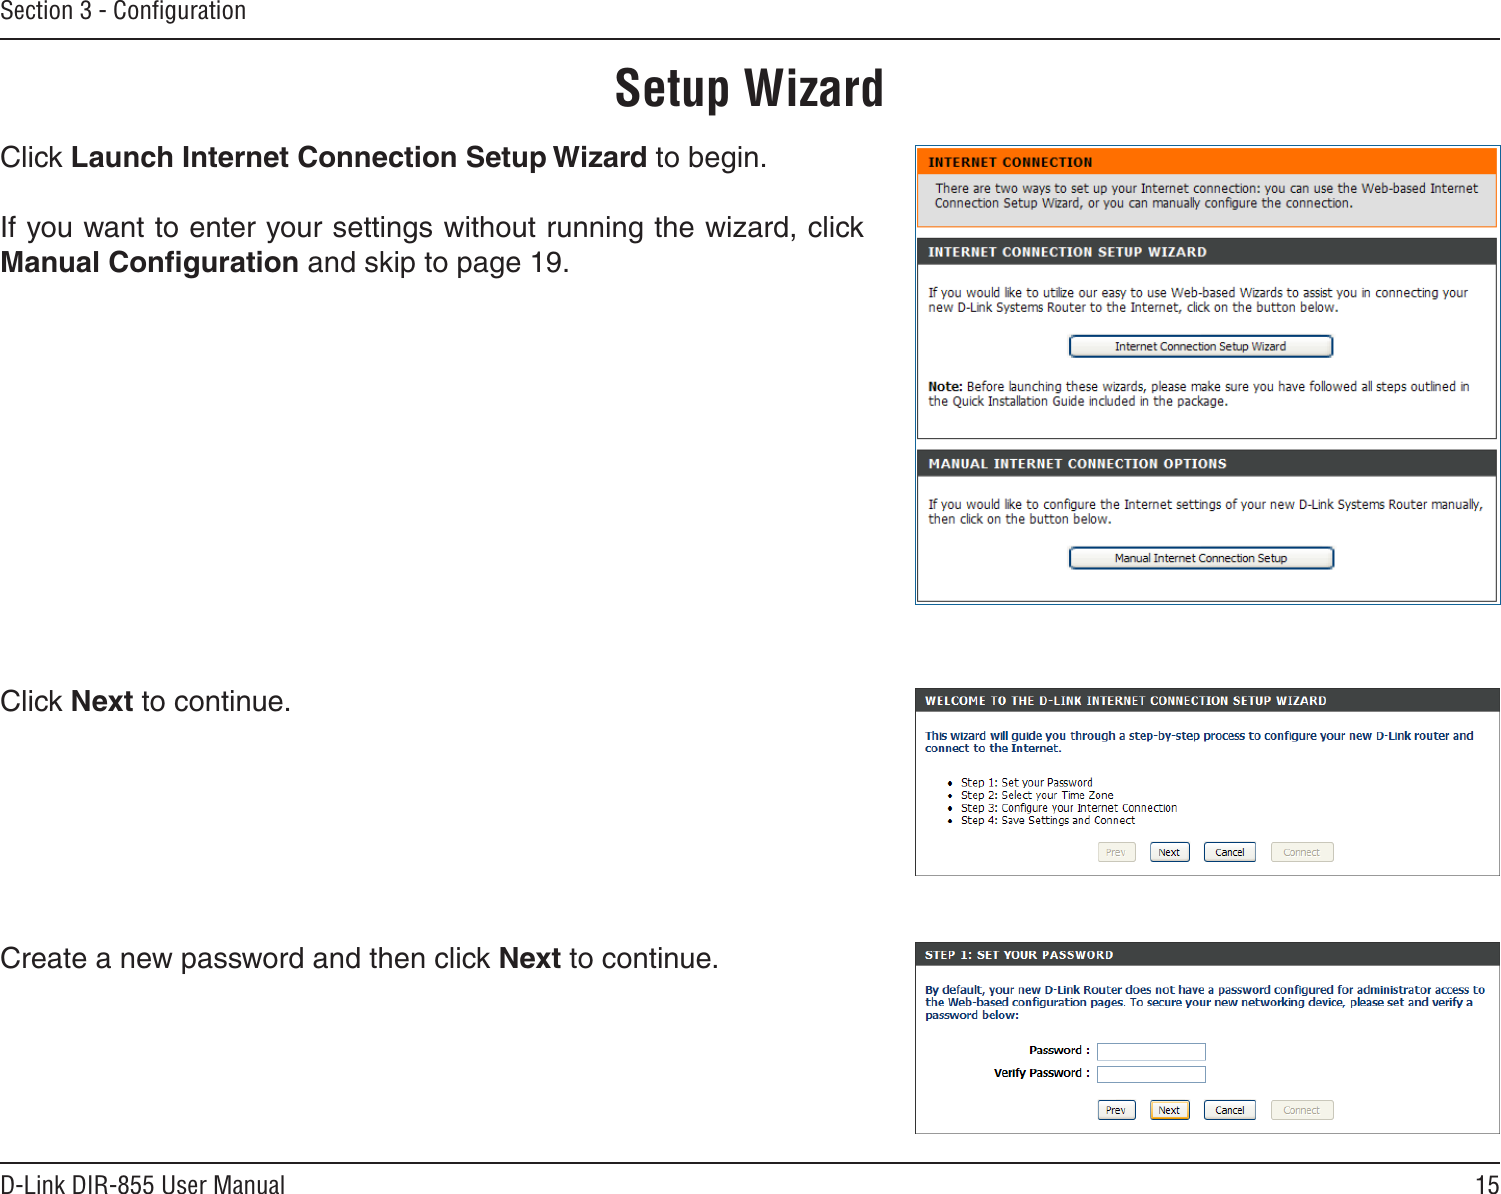 15D-Link DIR-855 User ManualSection 3 - ConﬁgurationSetup WizardClick Launch Internet Connection Setup Wizard to begin.If you want to enter your settings without running the wizard, click Manual Conﬁguration and skip to page 19.Click Next to continue.Create a new password and then click Next to continue.